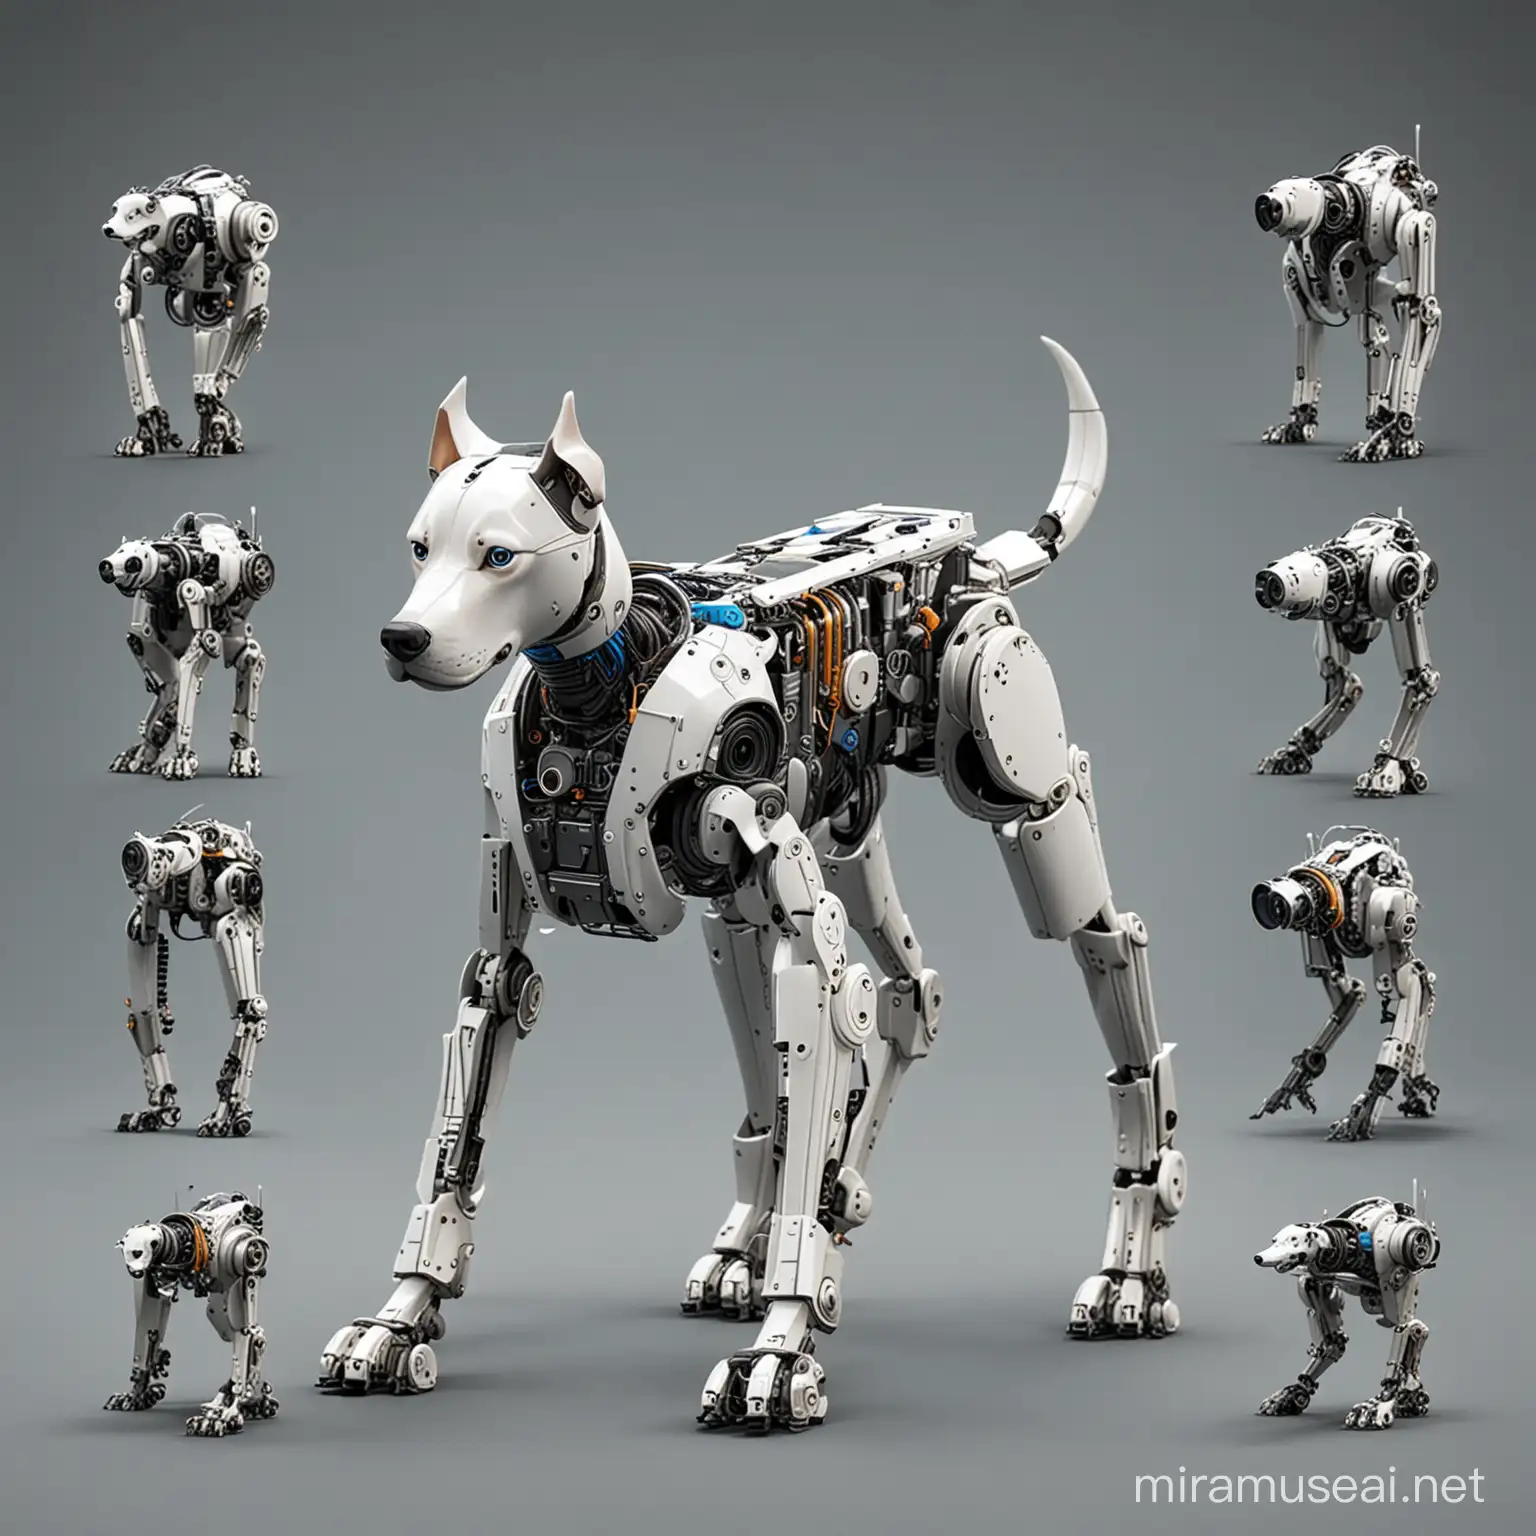 a robot dog designer job the person looks at the order and puts together all the parts to make the dog special